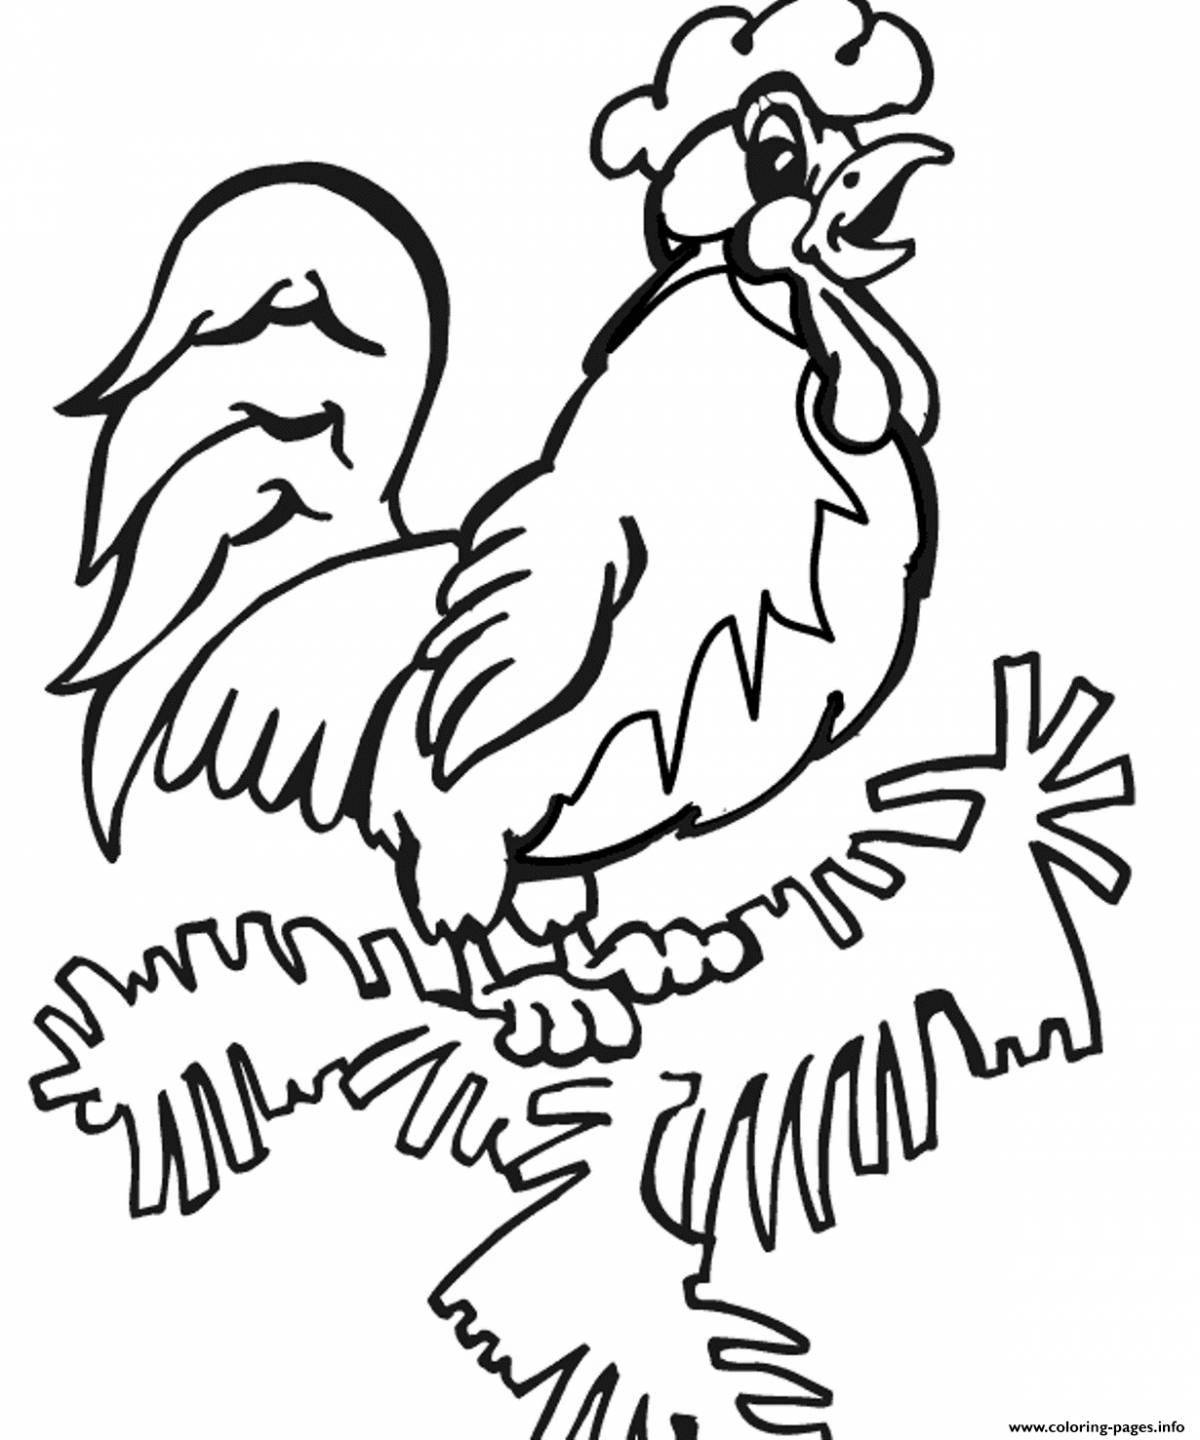 Coloring book shining rooster